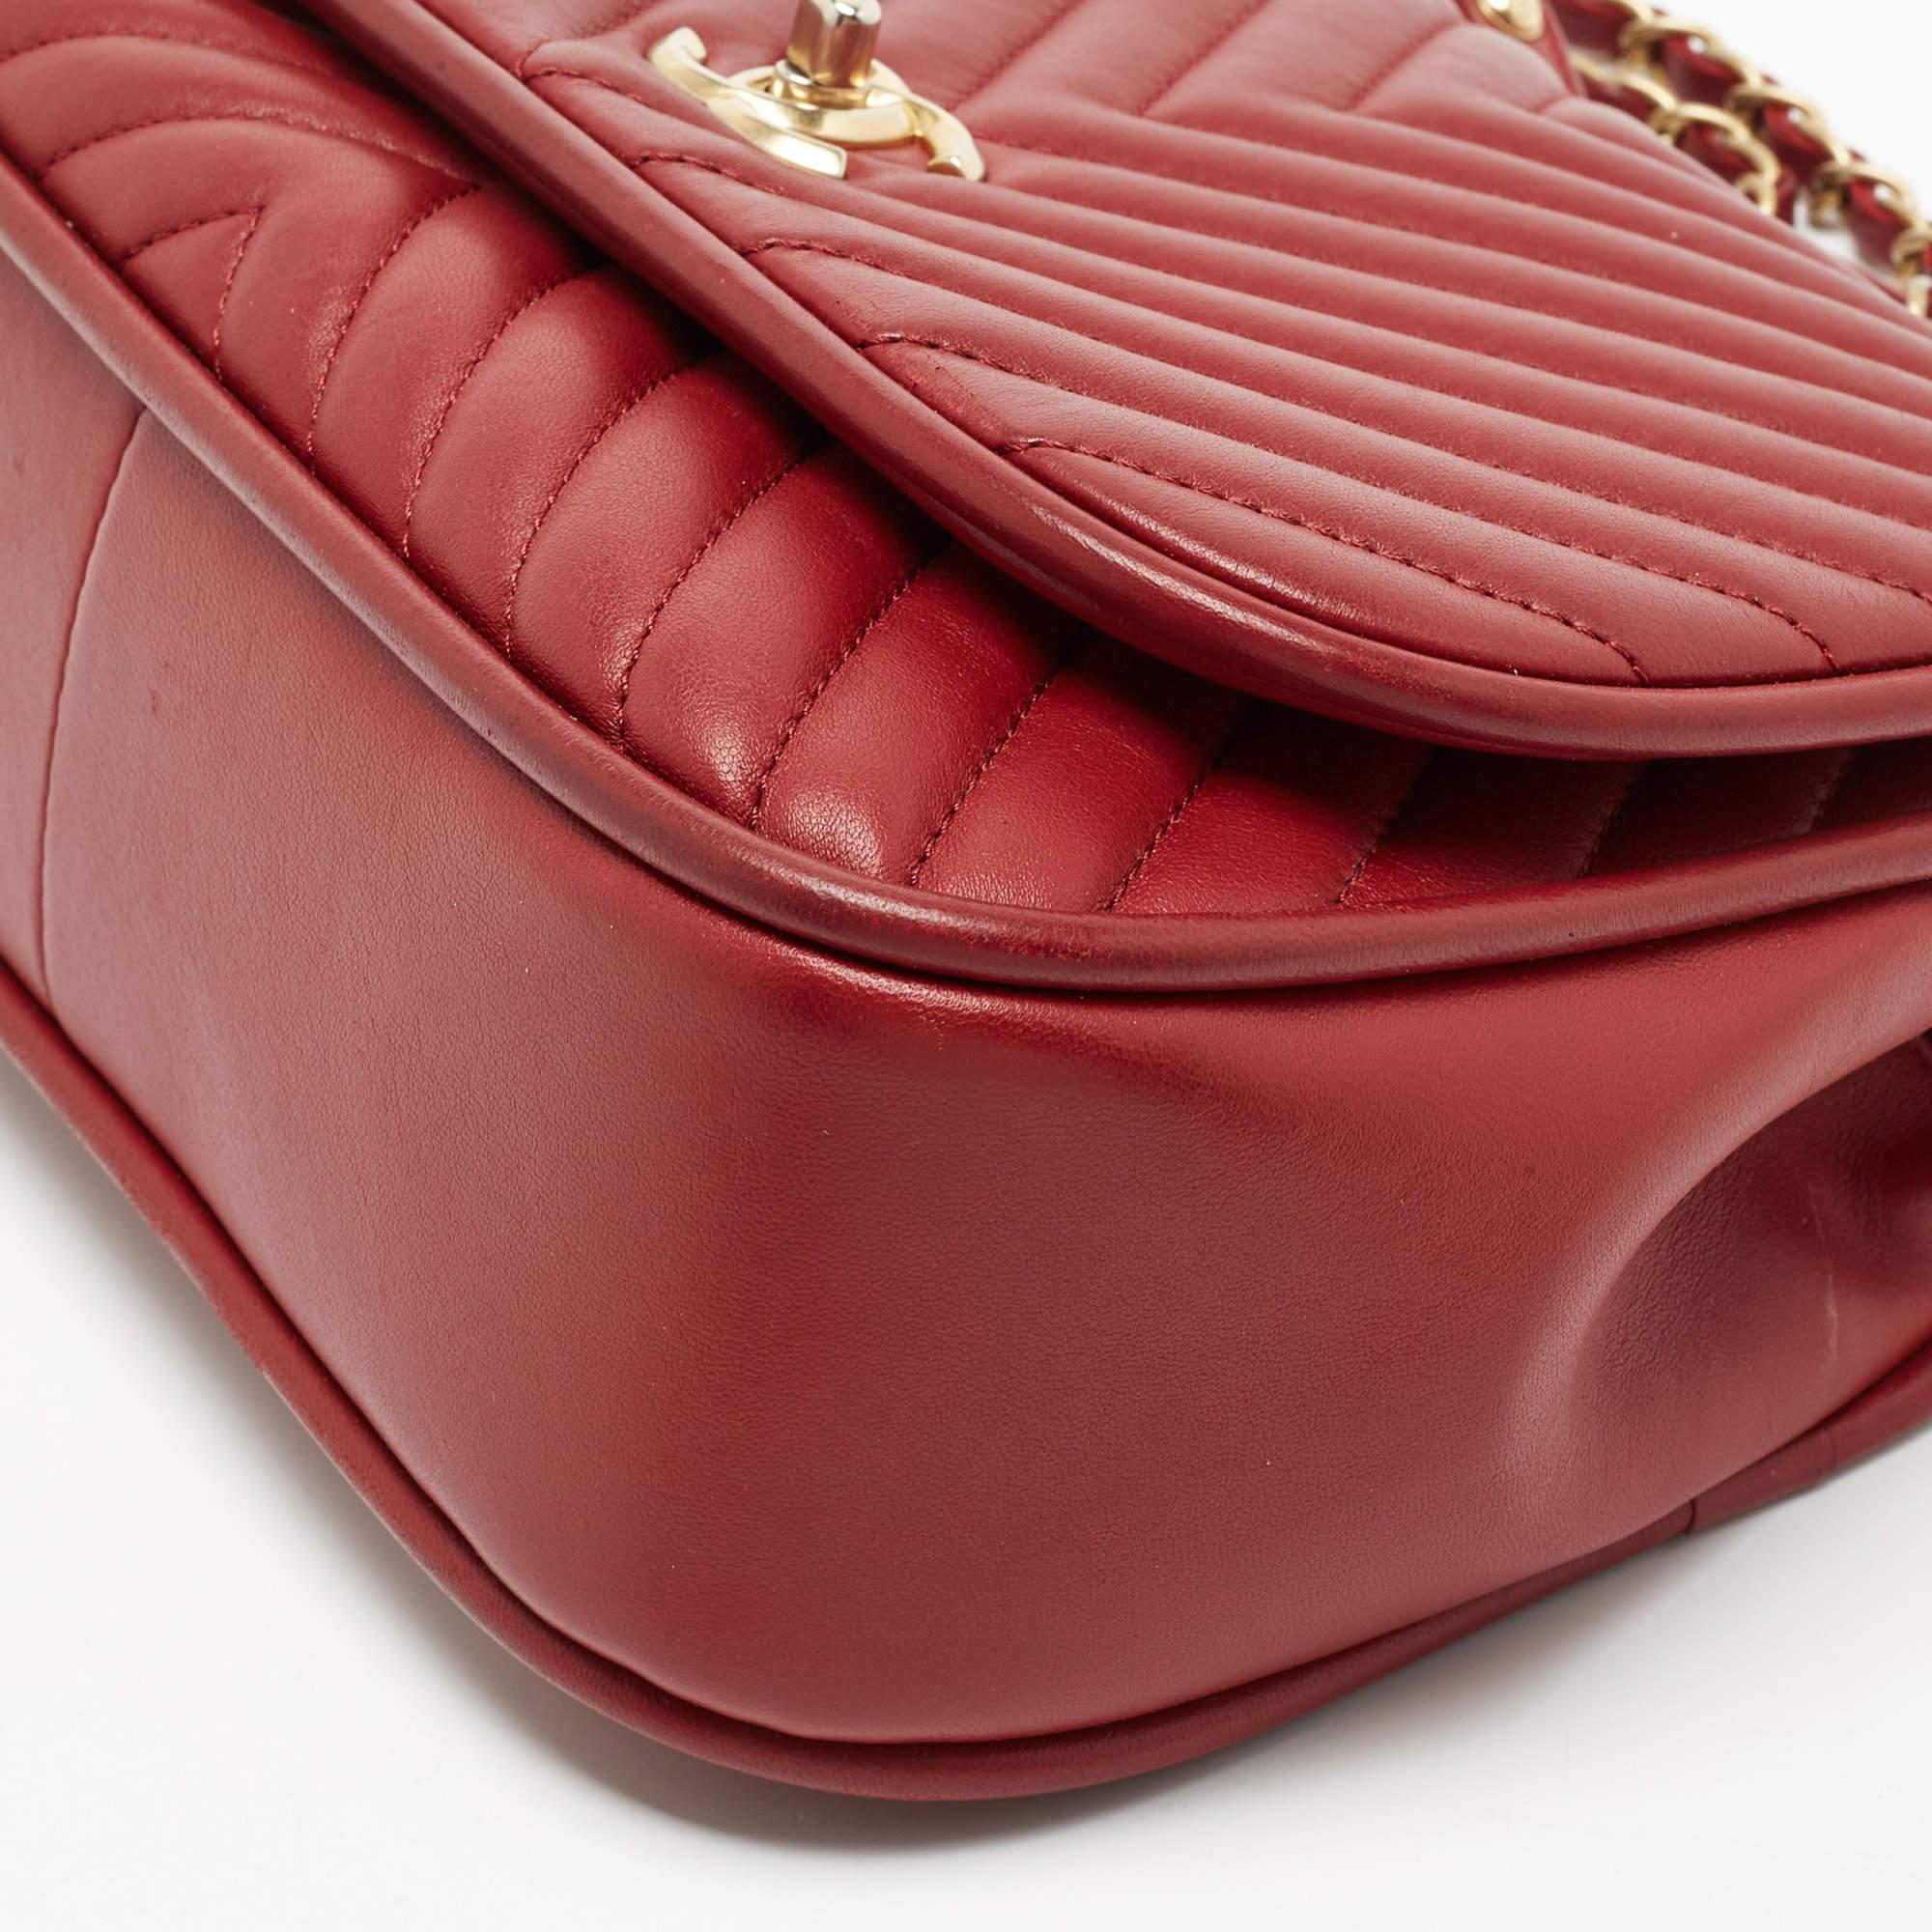 Chanel Red Chevron Leather CC Flap Top Handle Bag 7